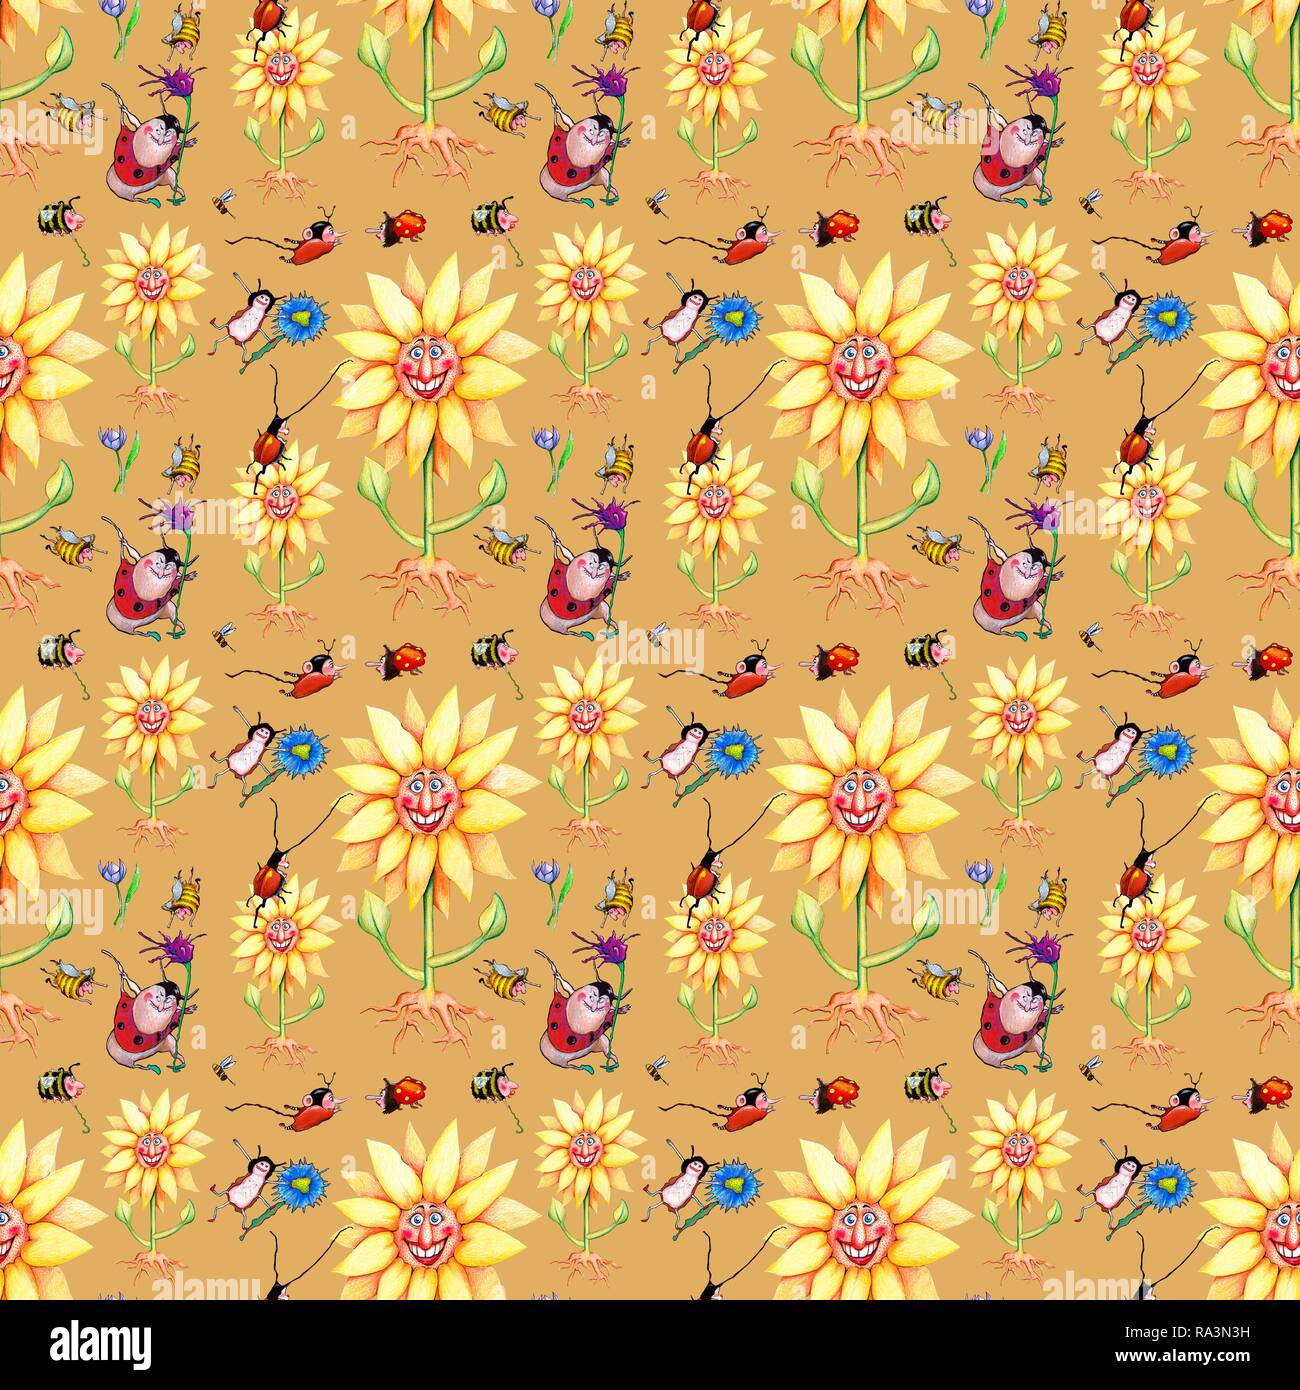 Wrapping paper, wallpaper, background brown, beige, seamless pattern, wild meadow, sunflowers, meadow flowers, beetles Stock Photo